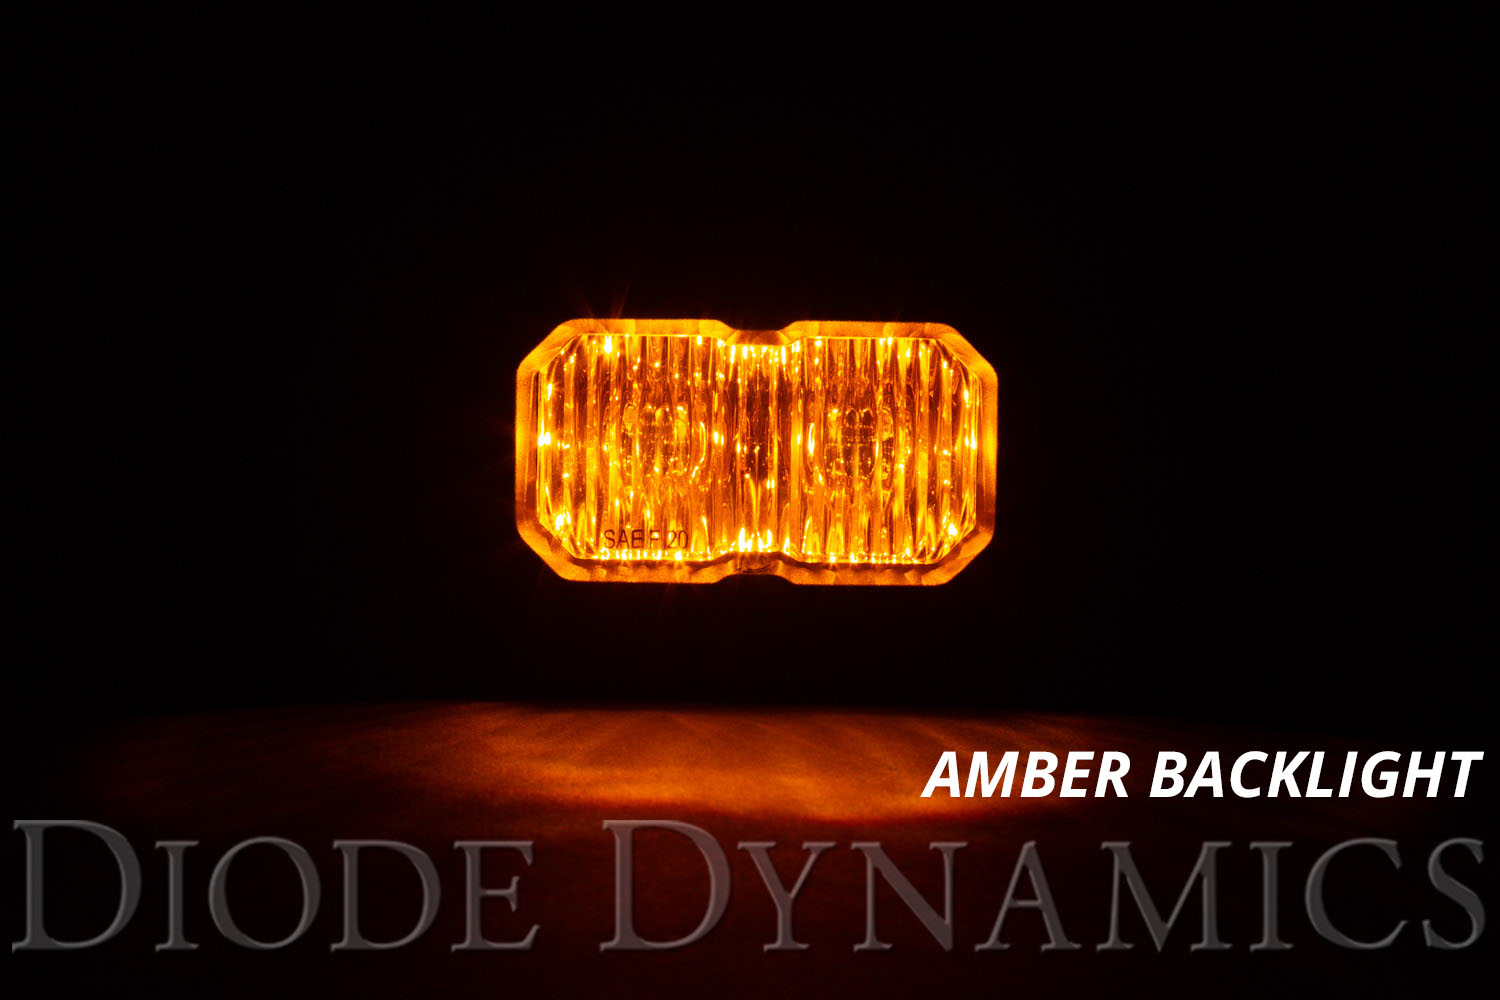 Diode Dynamics Stage Series 2 Inch LED Pod, Sport Yellow Fog Flush ABL Each - Click Image to Close